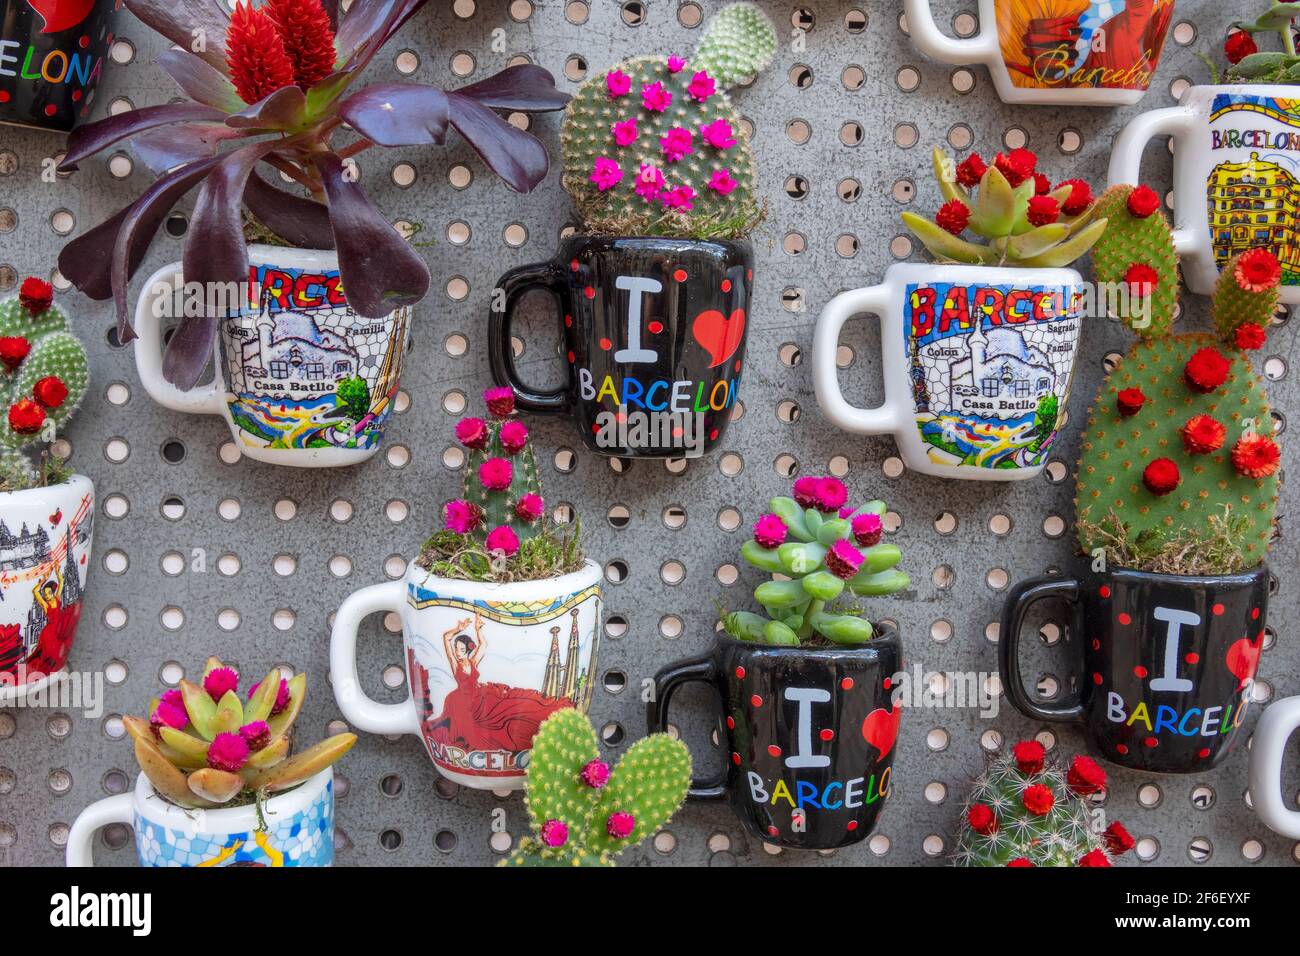 Scenes Of Popular Tourist Attractions In Barcelona Painted On China Tourist Mugs With Cactus Plants Growing In Them Barcelona Spain Stock Photo